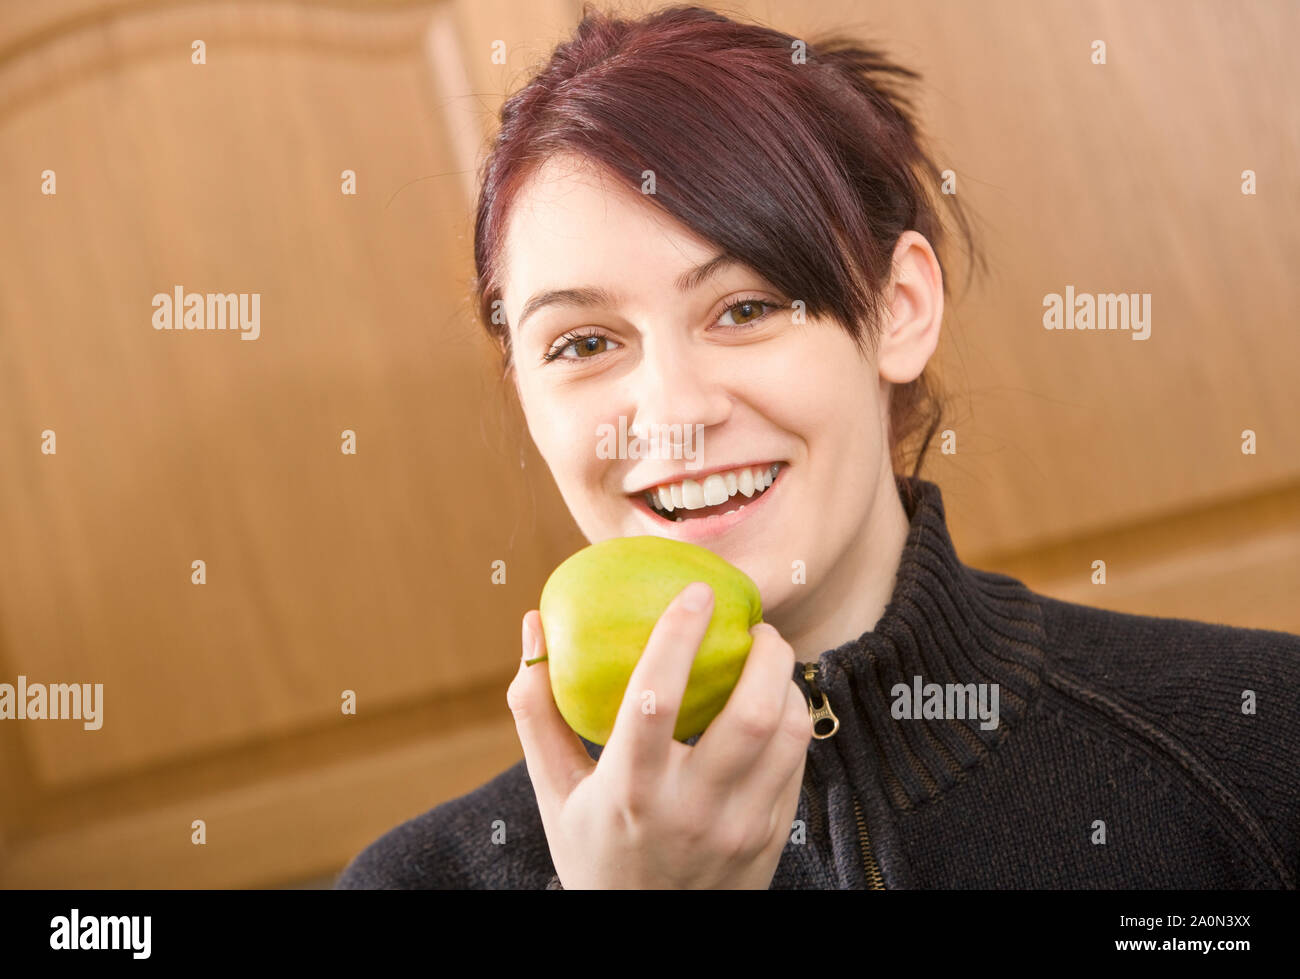 Young woman eating an apple indoors Stock Photo